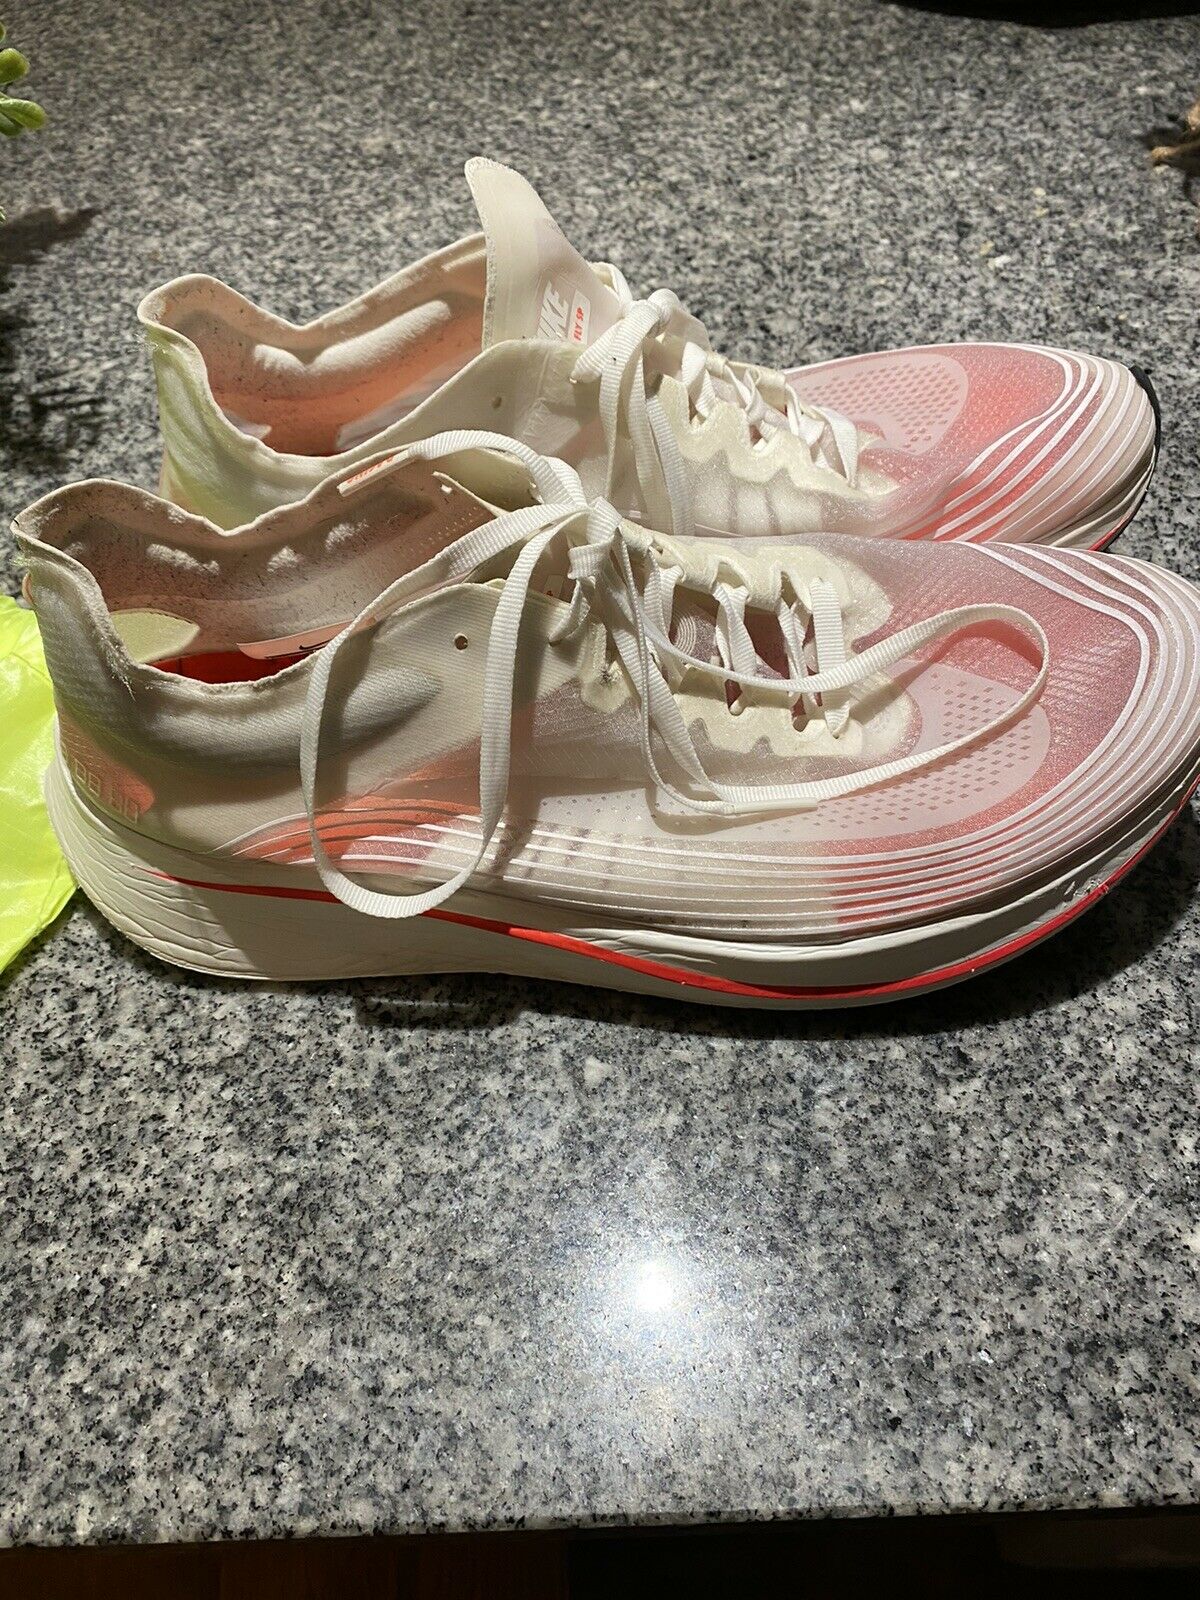 nike shoes 10.5 mens Zoom Fly